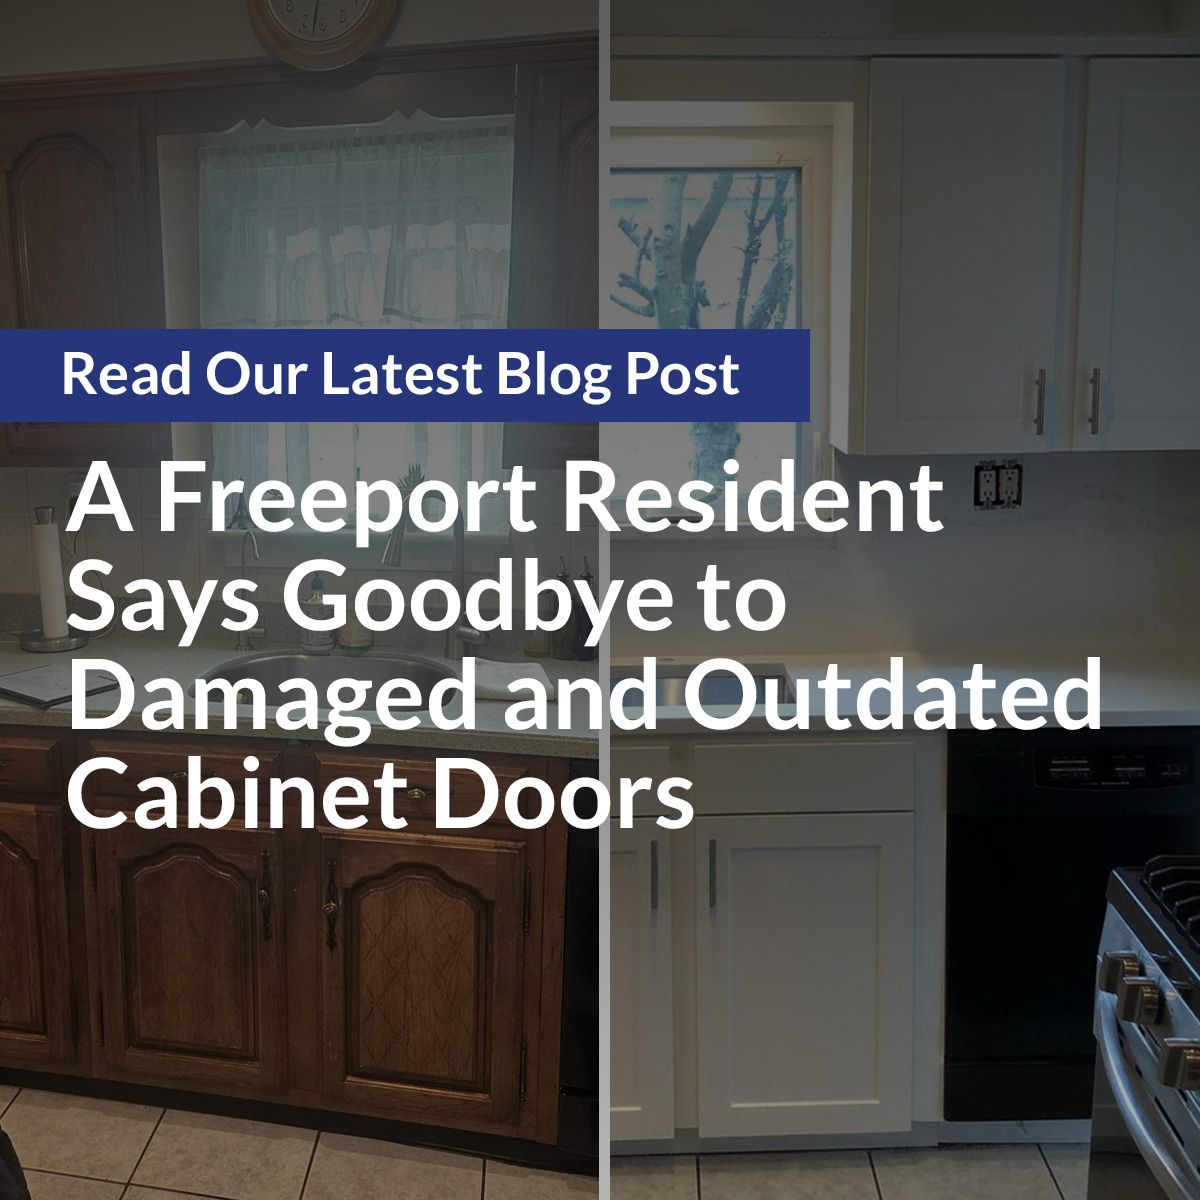 A Freeport Resident Says Goodbye to Damaged and Outdated Cabinet Doors